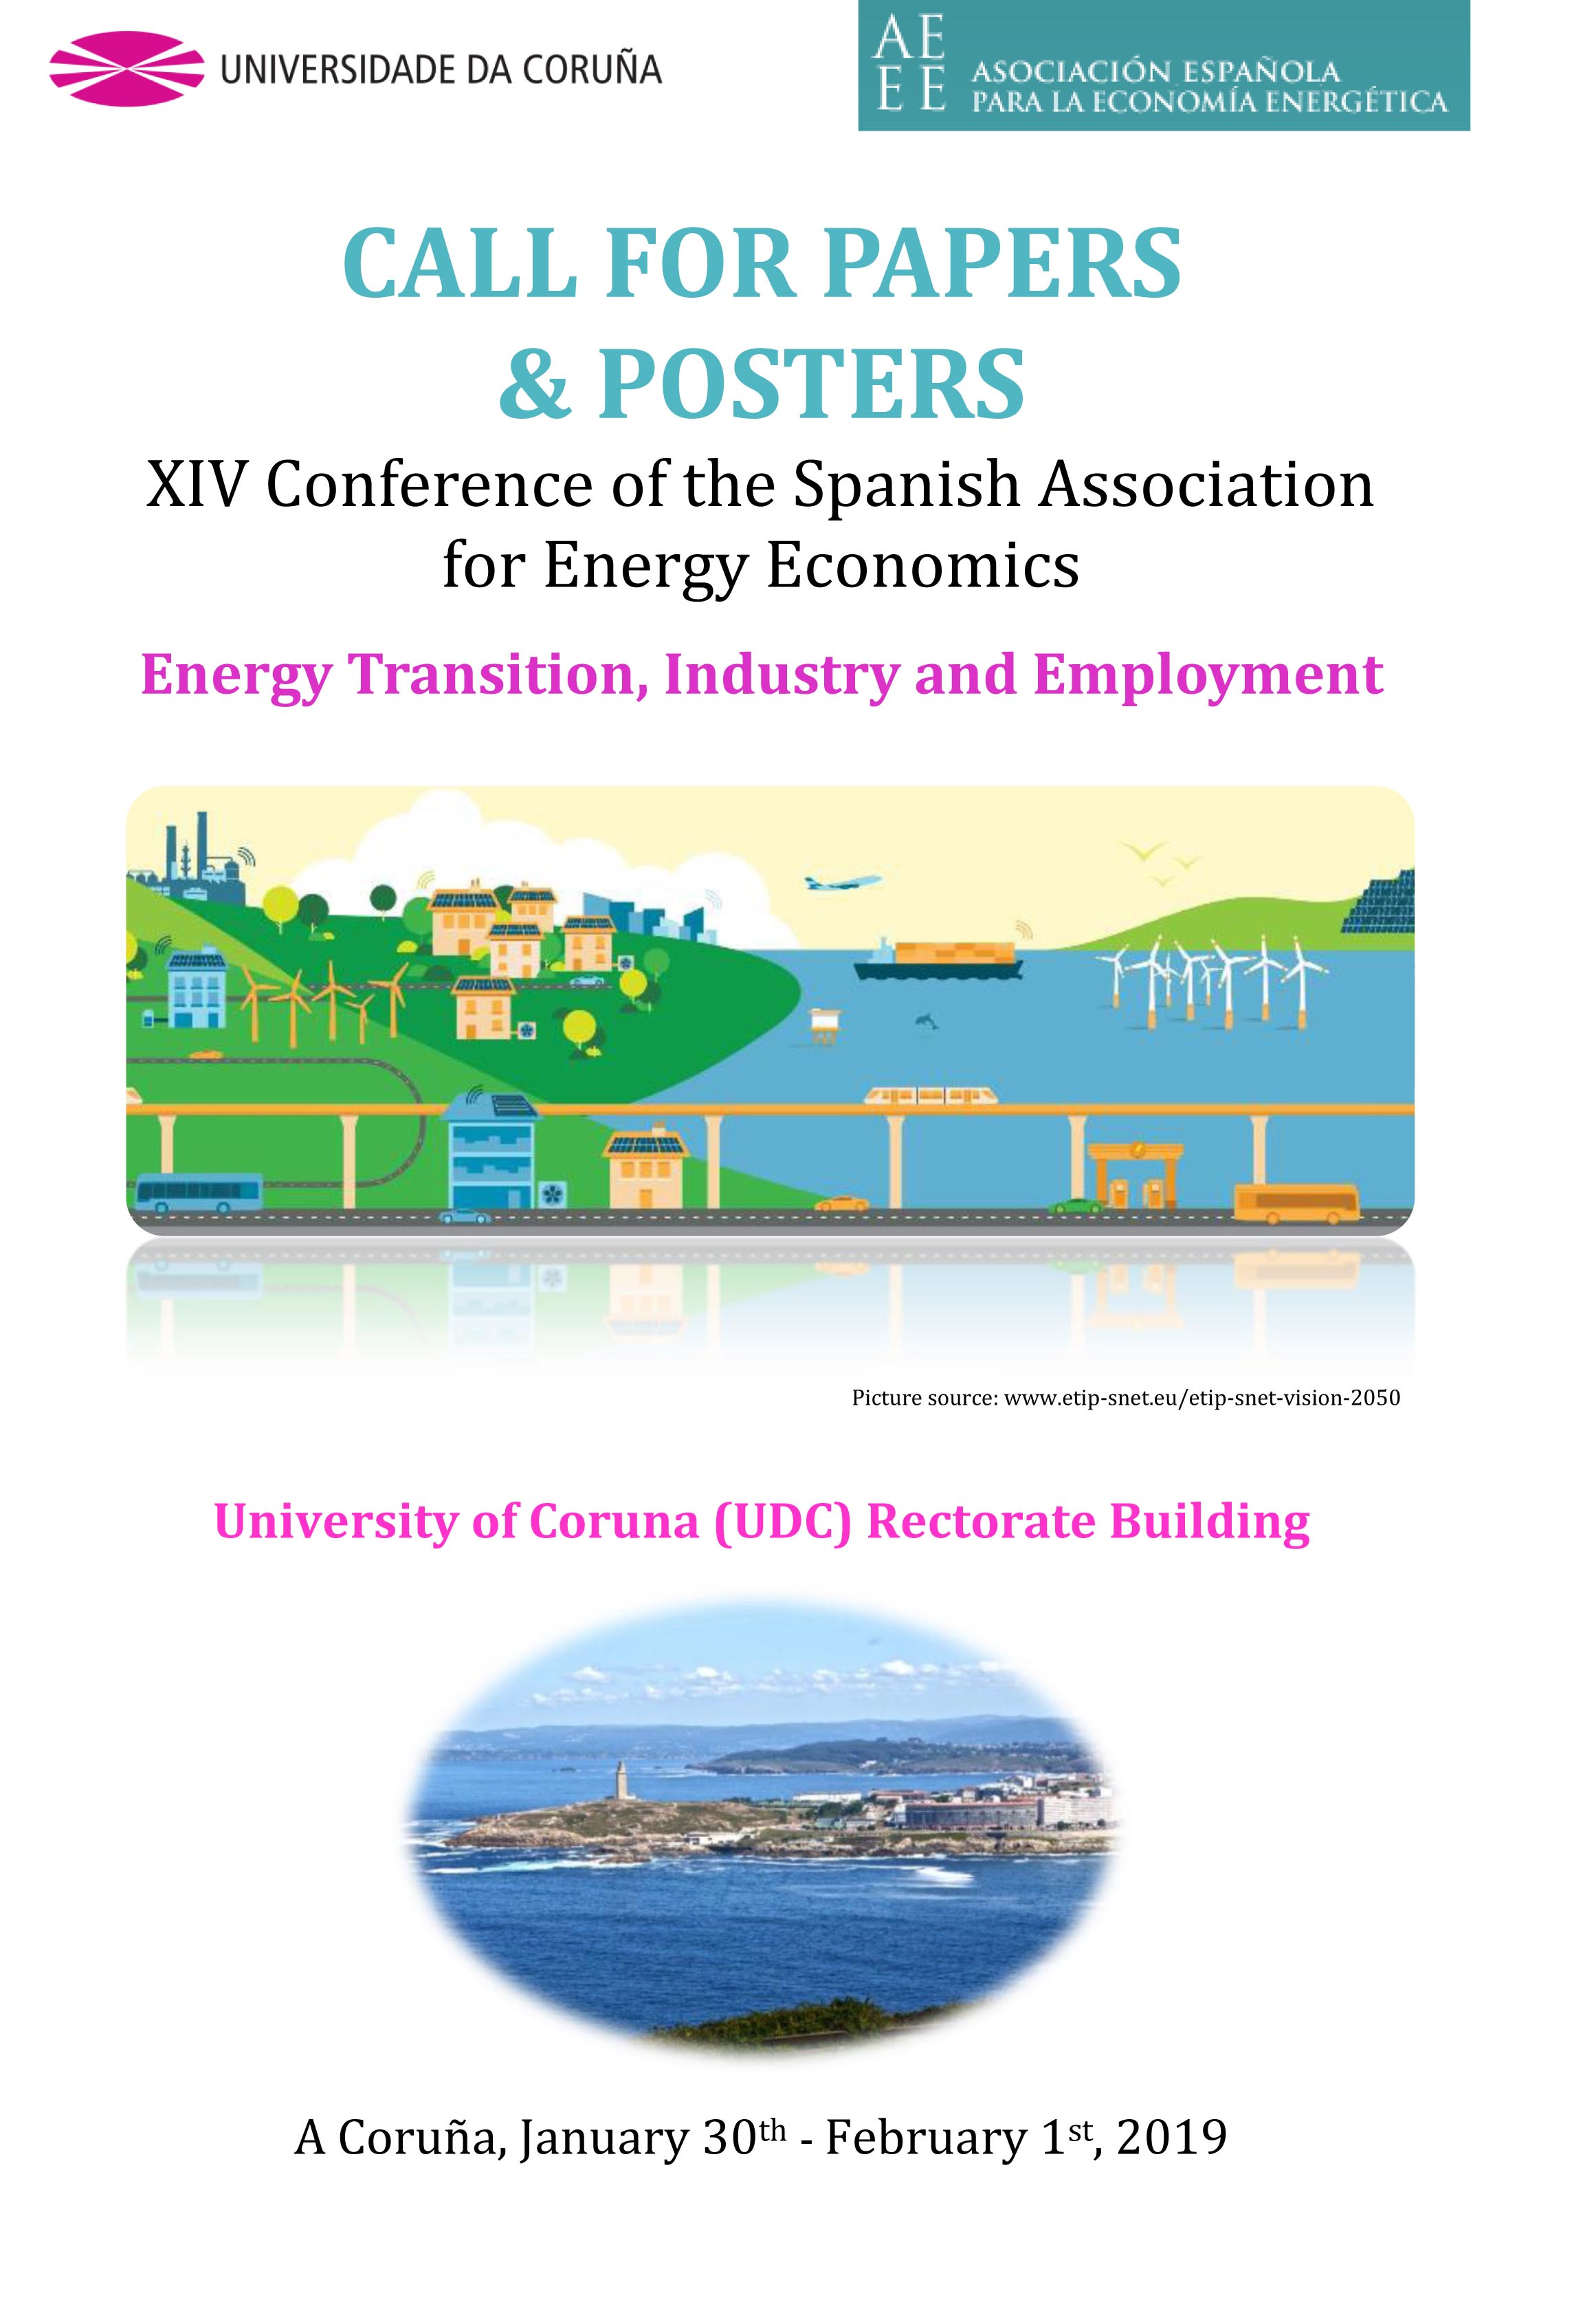 AEEE_2019_CONFERENCE_CALL_FOR_PAPERS_AND_POSTERS-A_CORUNA